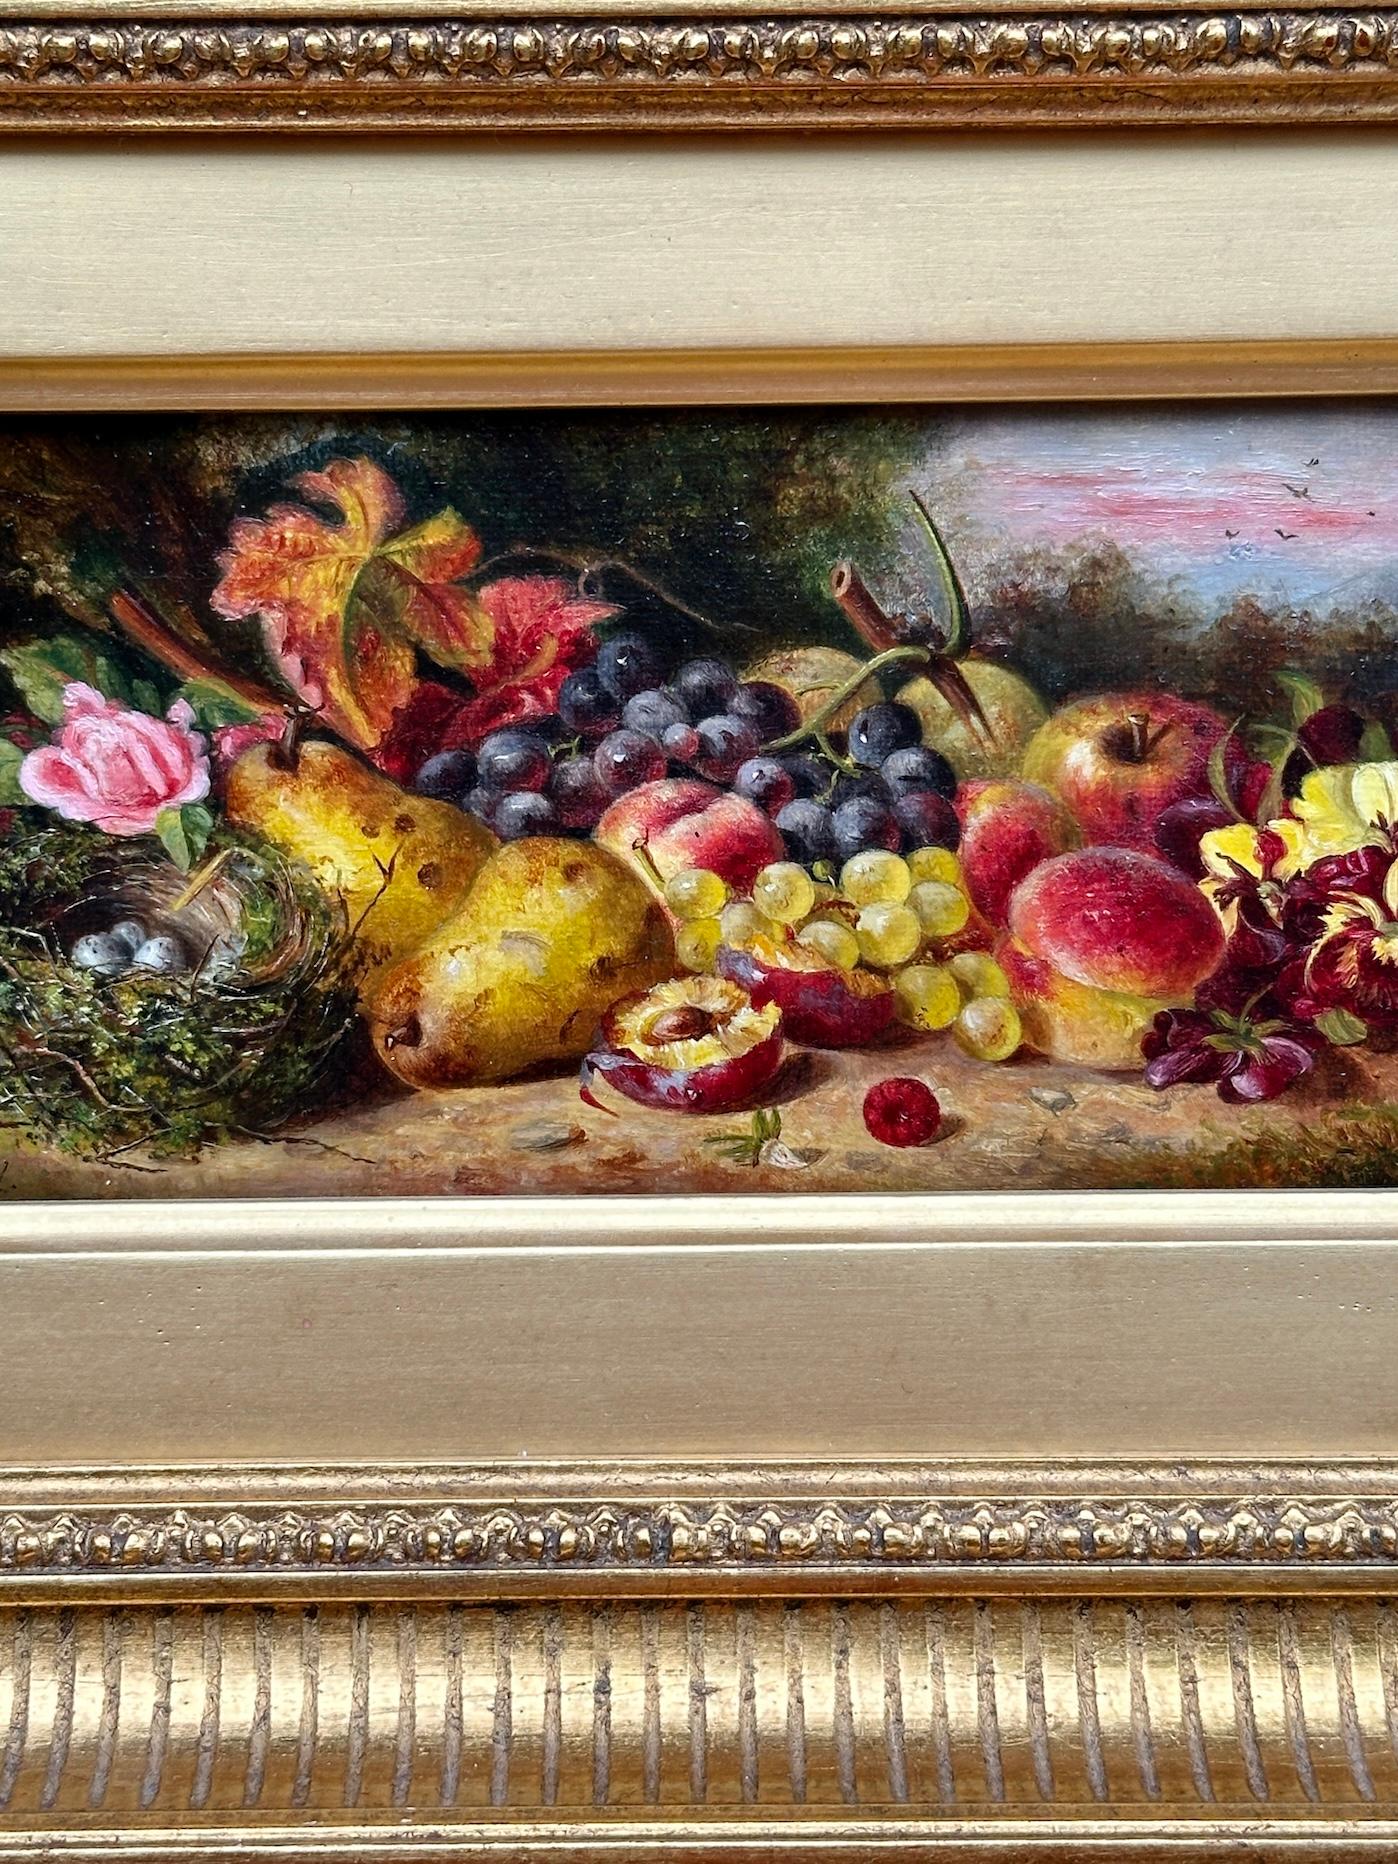 19th century English still life of fruit, apples, pears, birds nest, flowers - Painting by Ellen Ladell